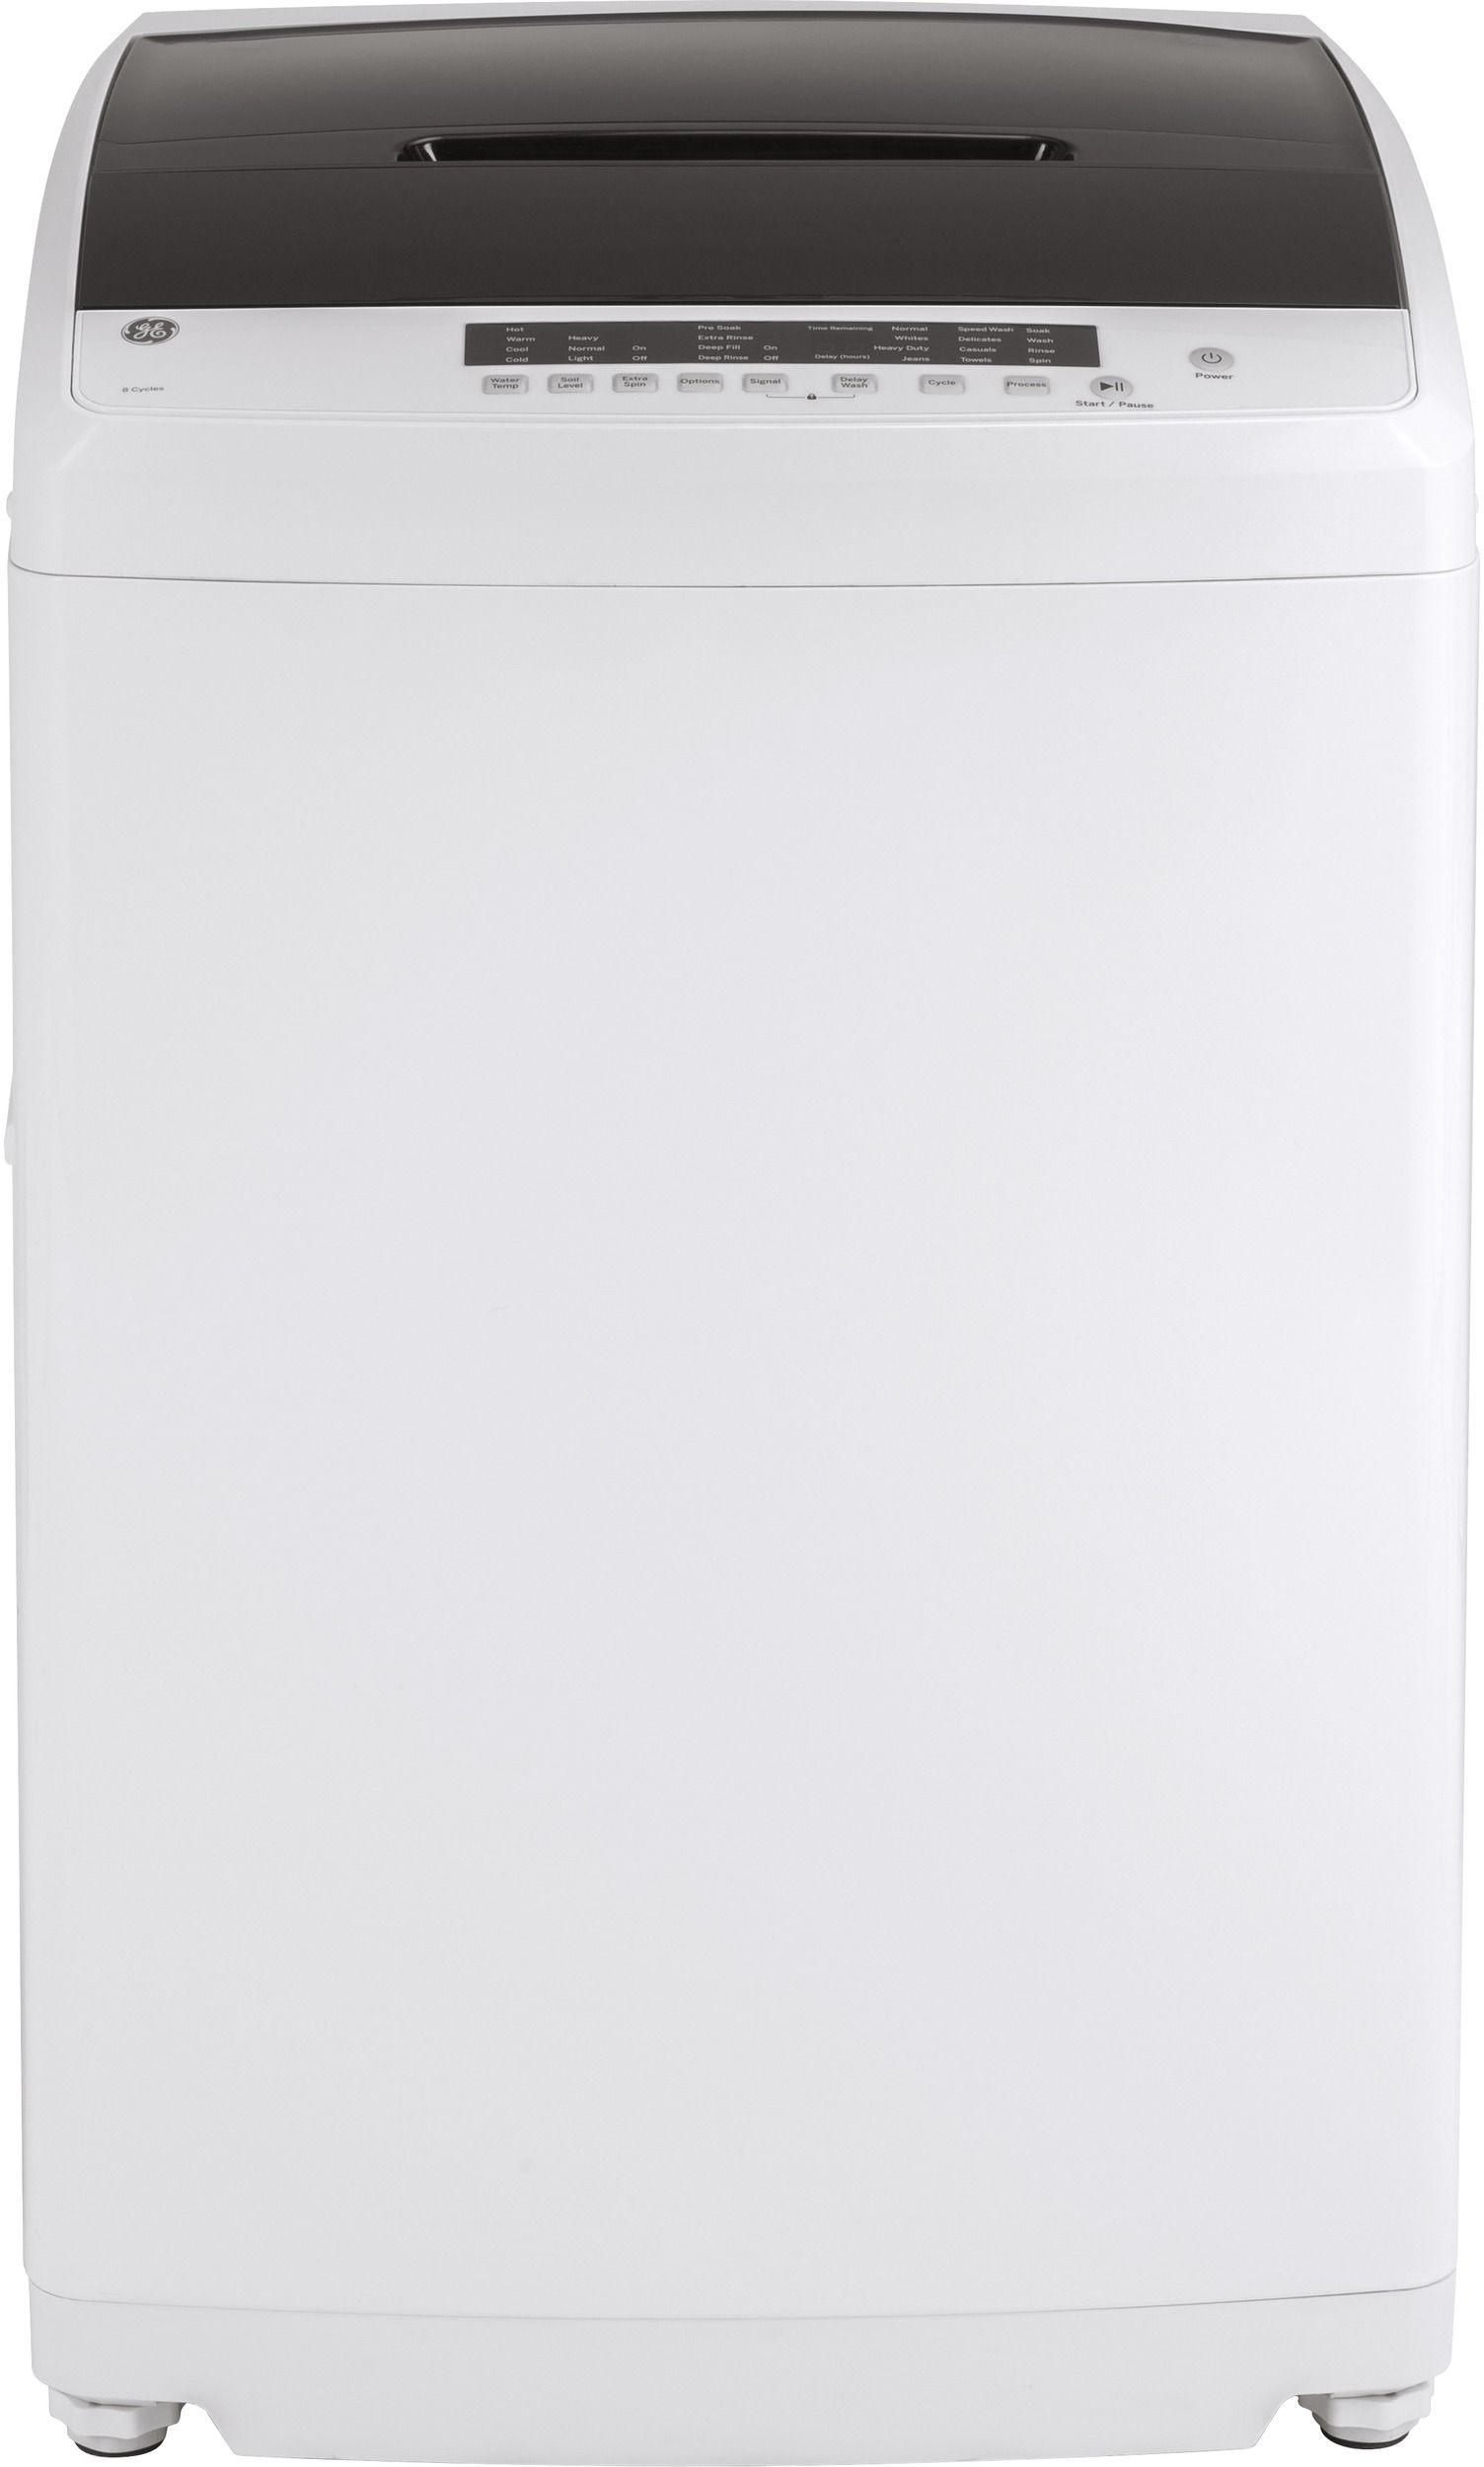 GE® 2.8 Cu. Ft. White Top Load Washer-GNW128SSMWW